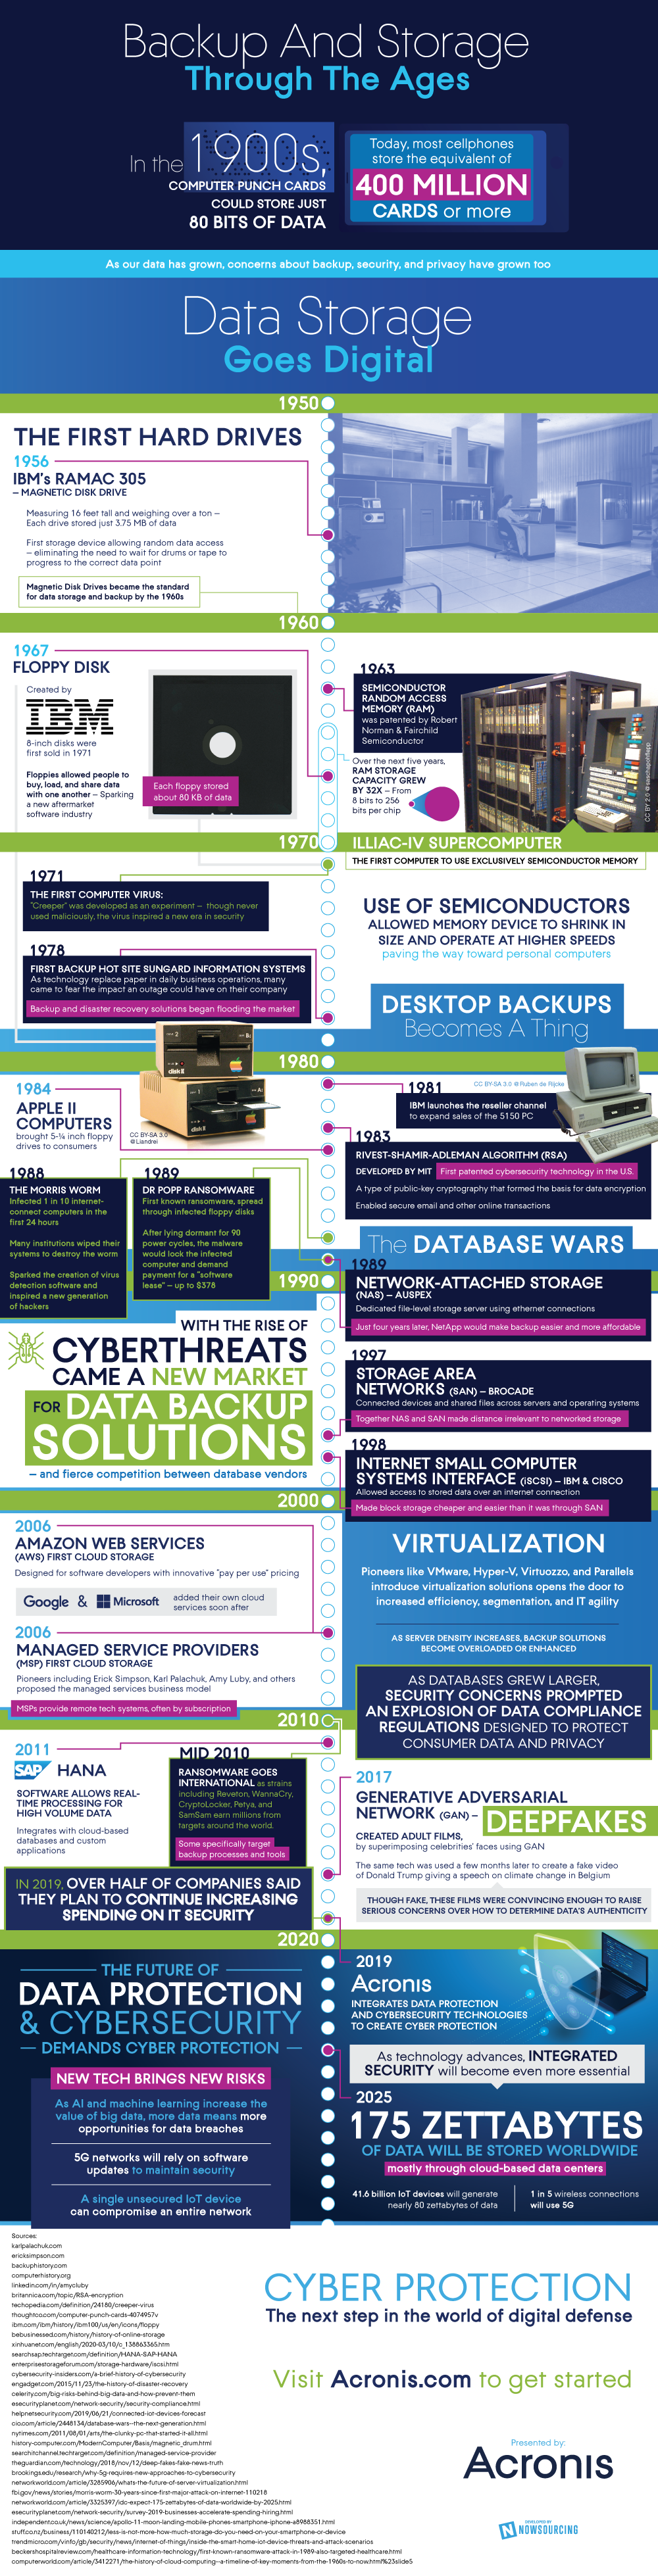 A Look Back at the Evolution of Cyber Protection